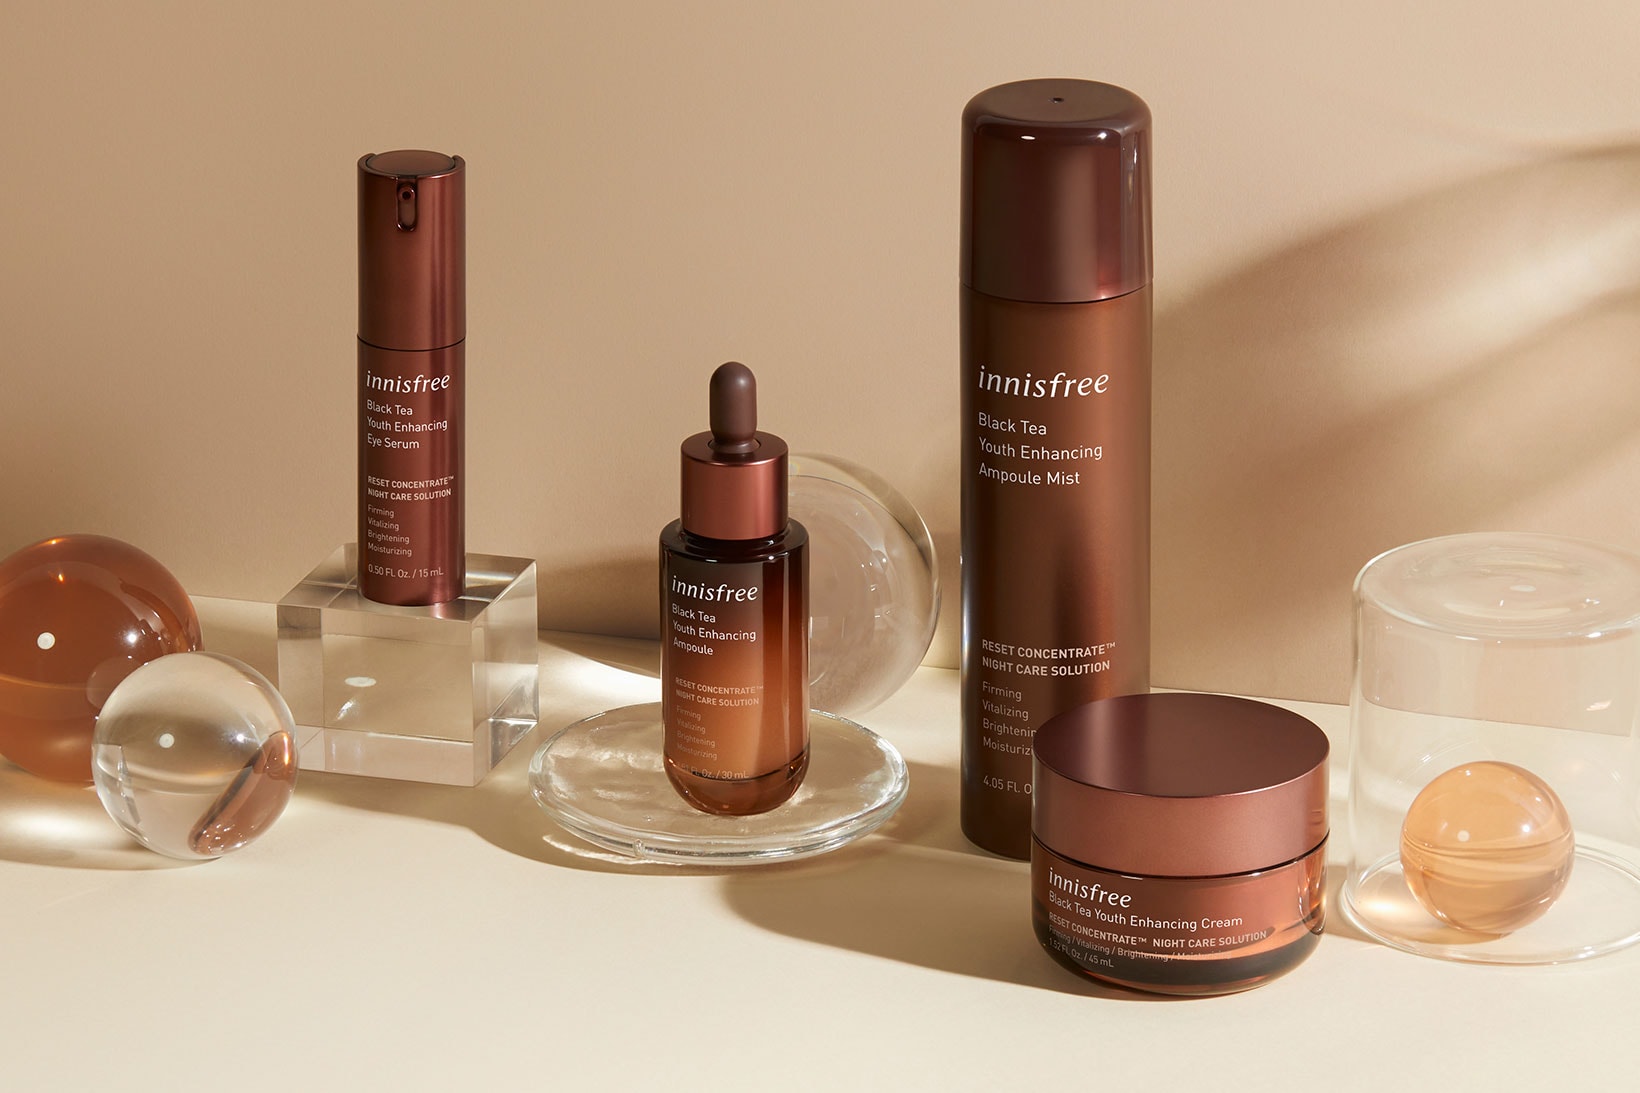 innisfree black tea youth enhancing line products collection k-beauty skincare ampoule